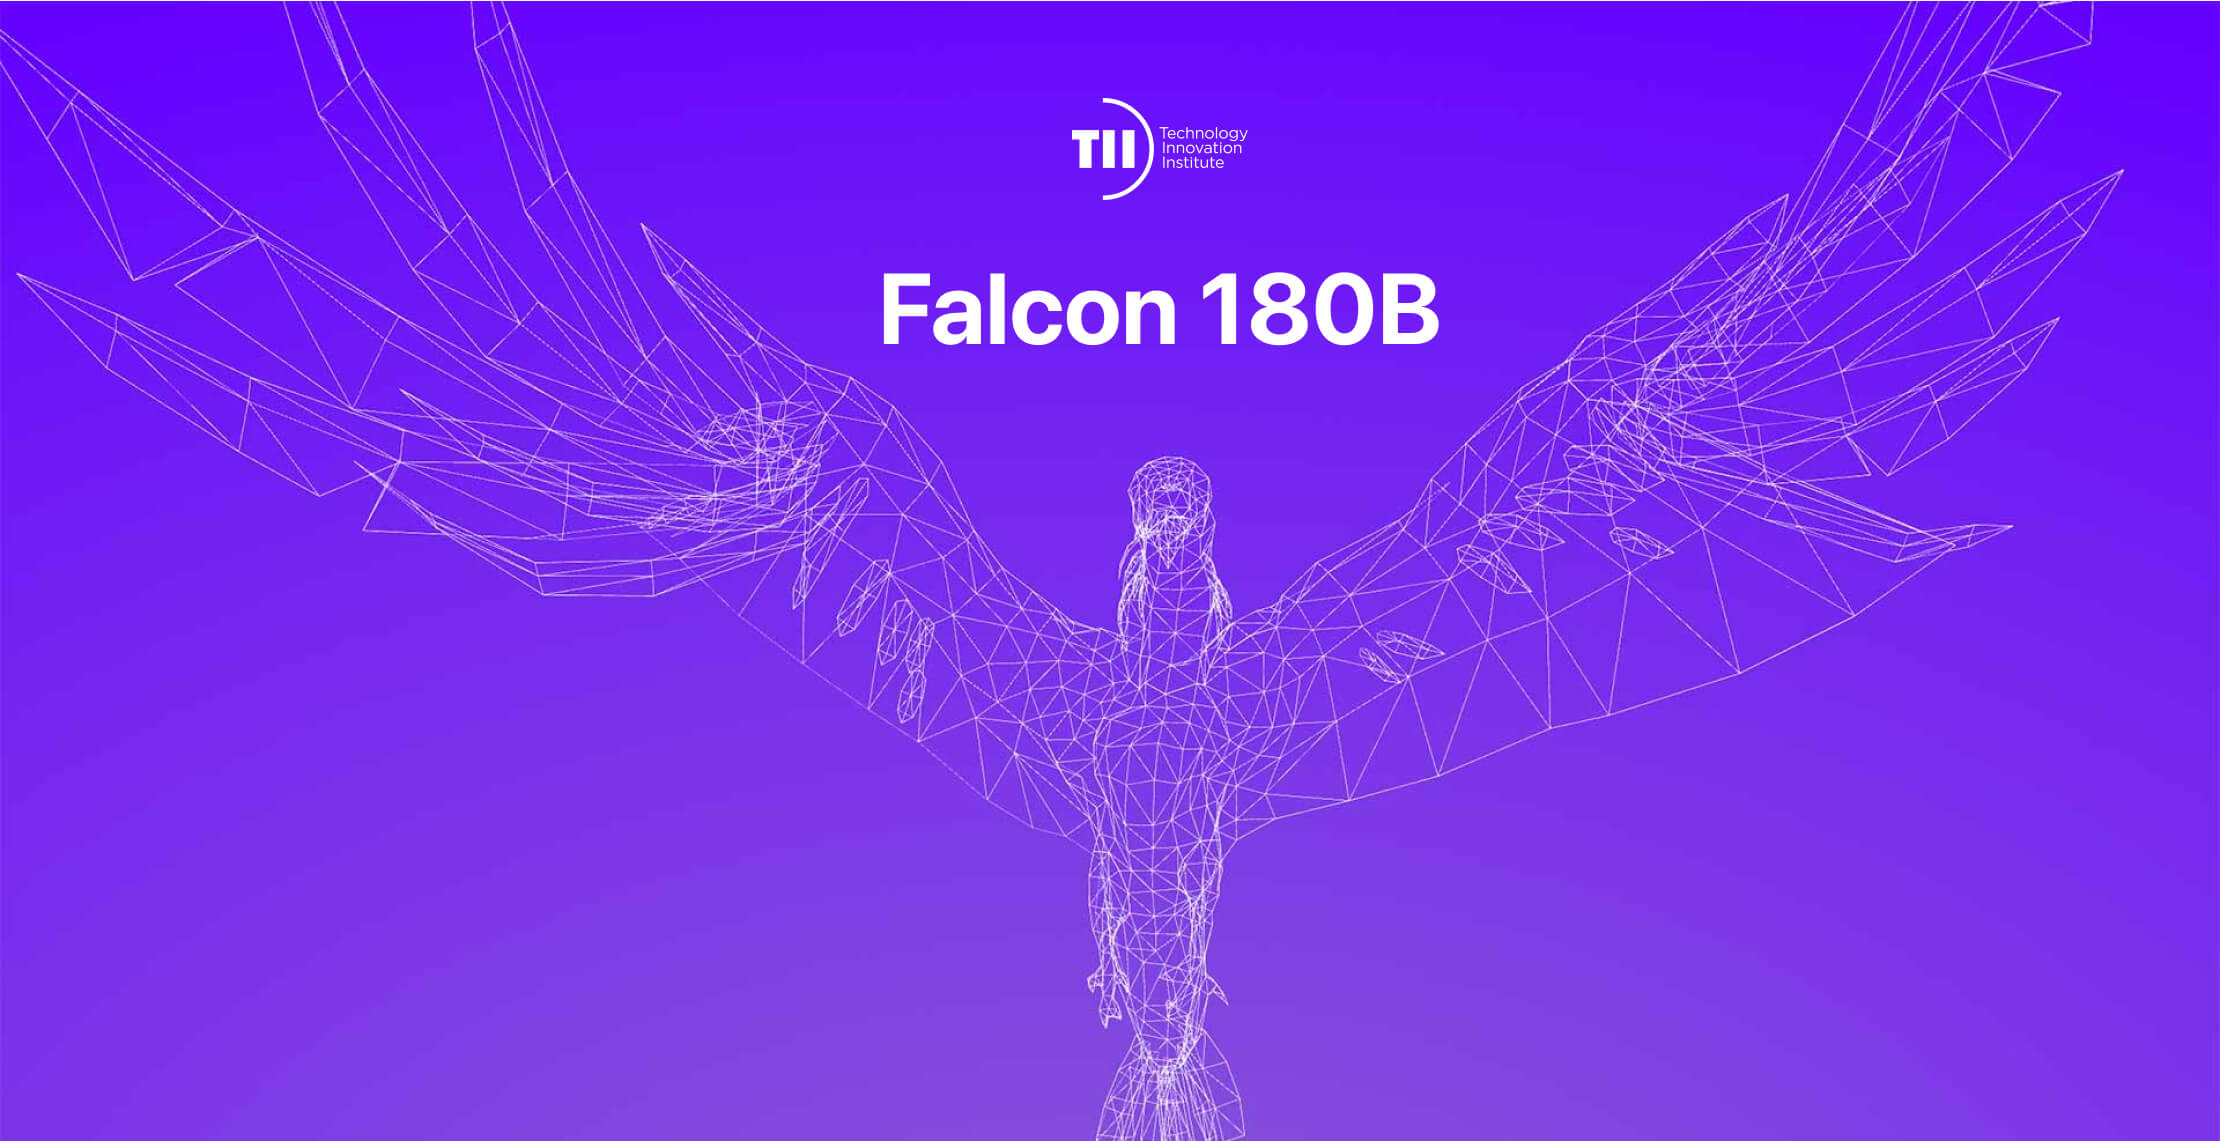 Meet TII’s Falcon 180B: the World’s Most Powerful Open Source LLM